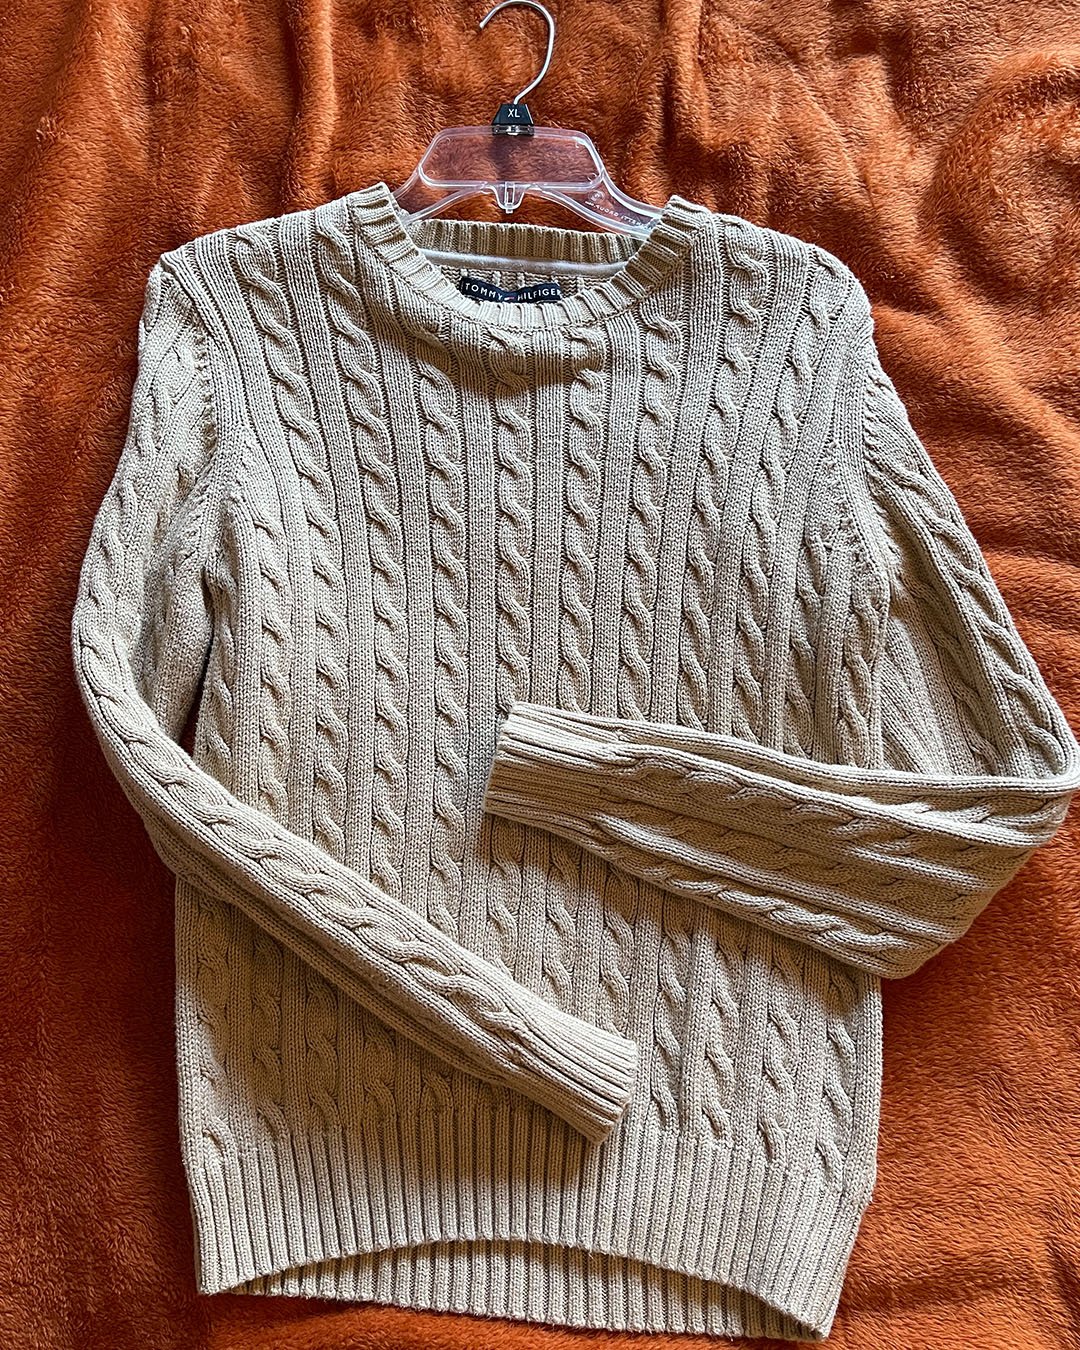 L - Rory Gilmore Sweater